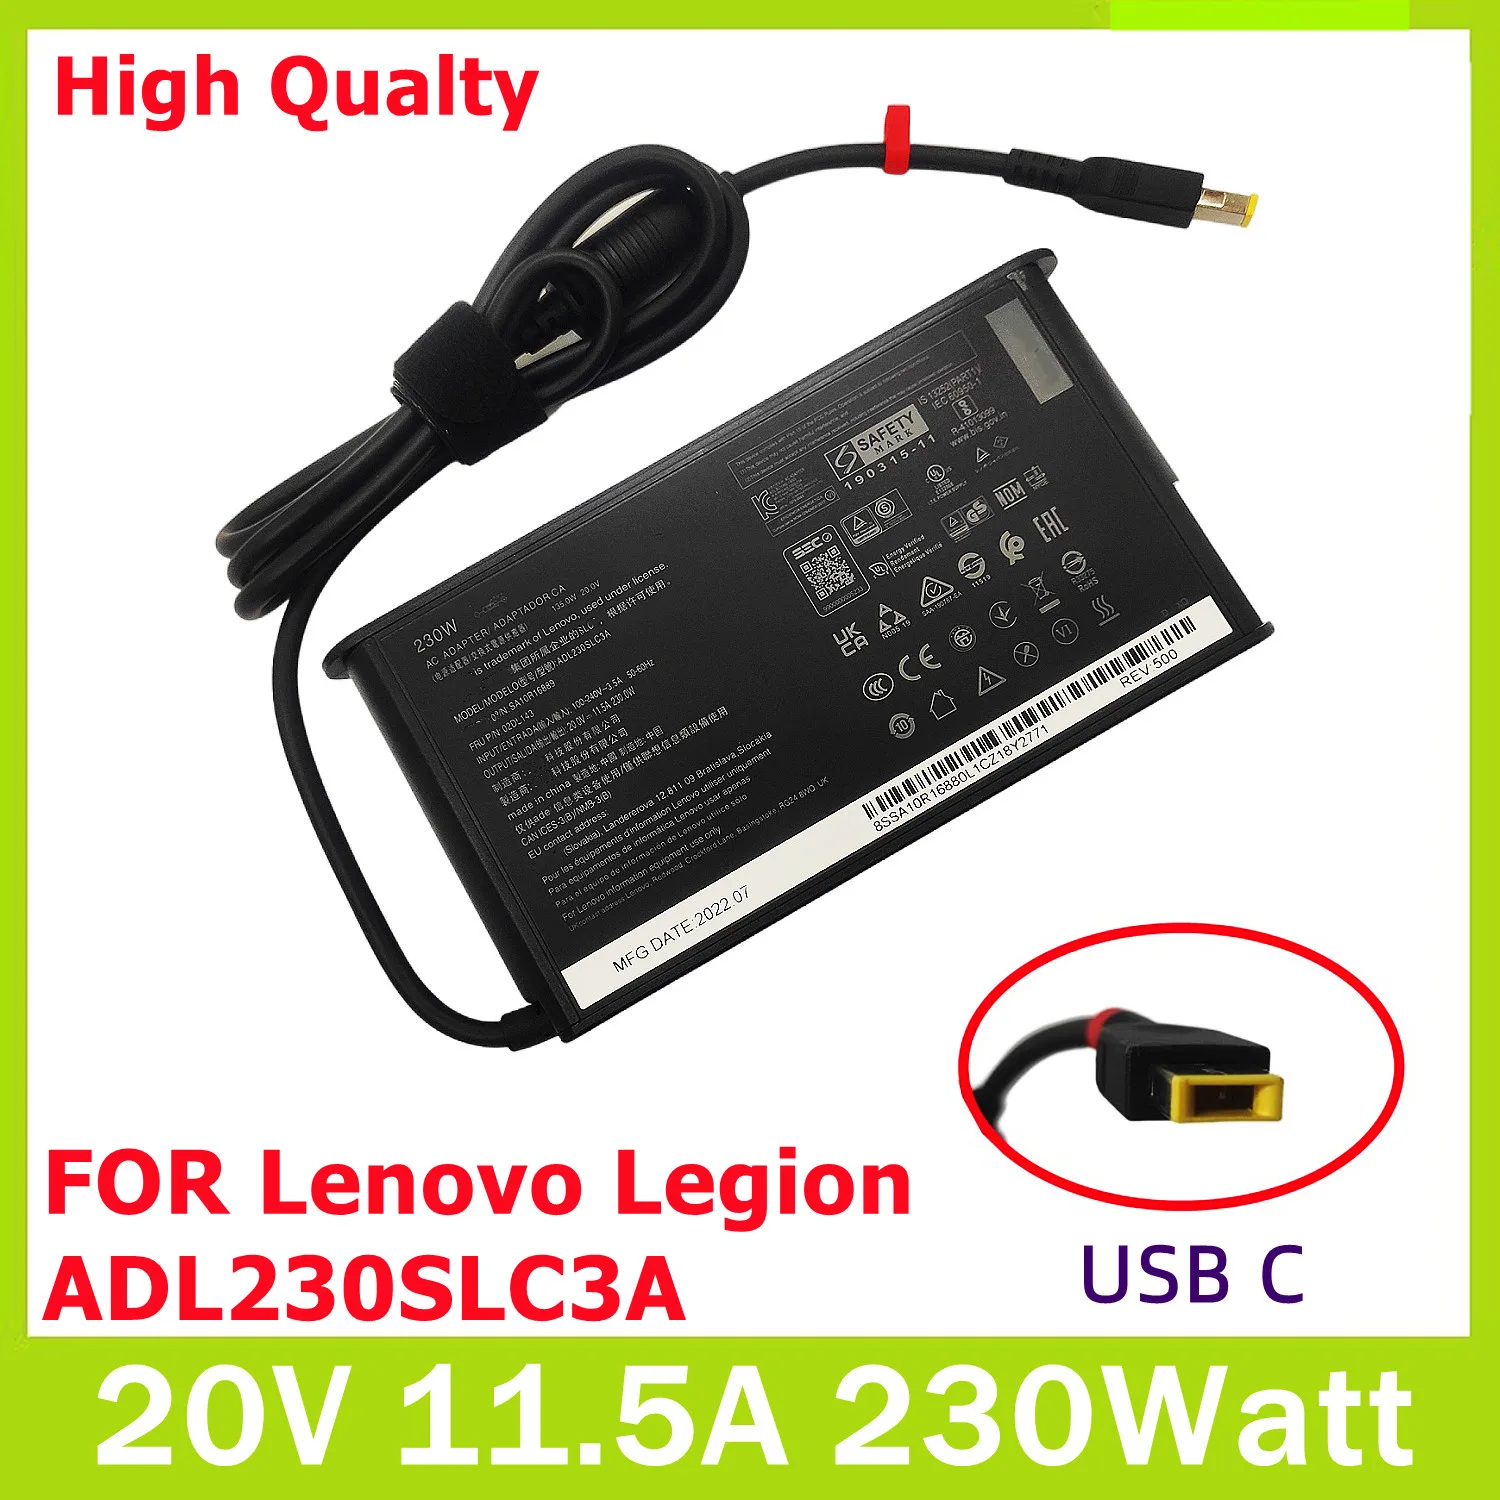 XMSJ Genuine 20V 11.5A USB 230W ADL230SDC3A ADL230SLC3A AC Adapter For Lenovo W540 P71 P72 P73 Y900 Power Supply Laptop Charger